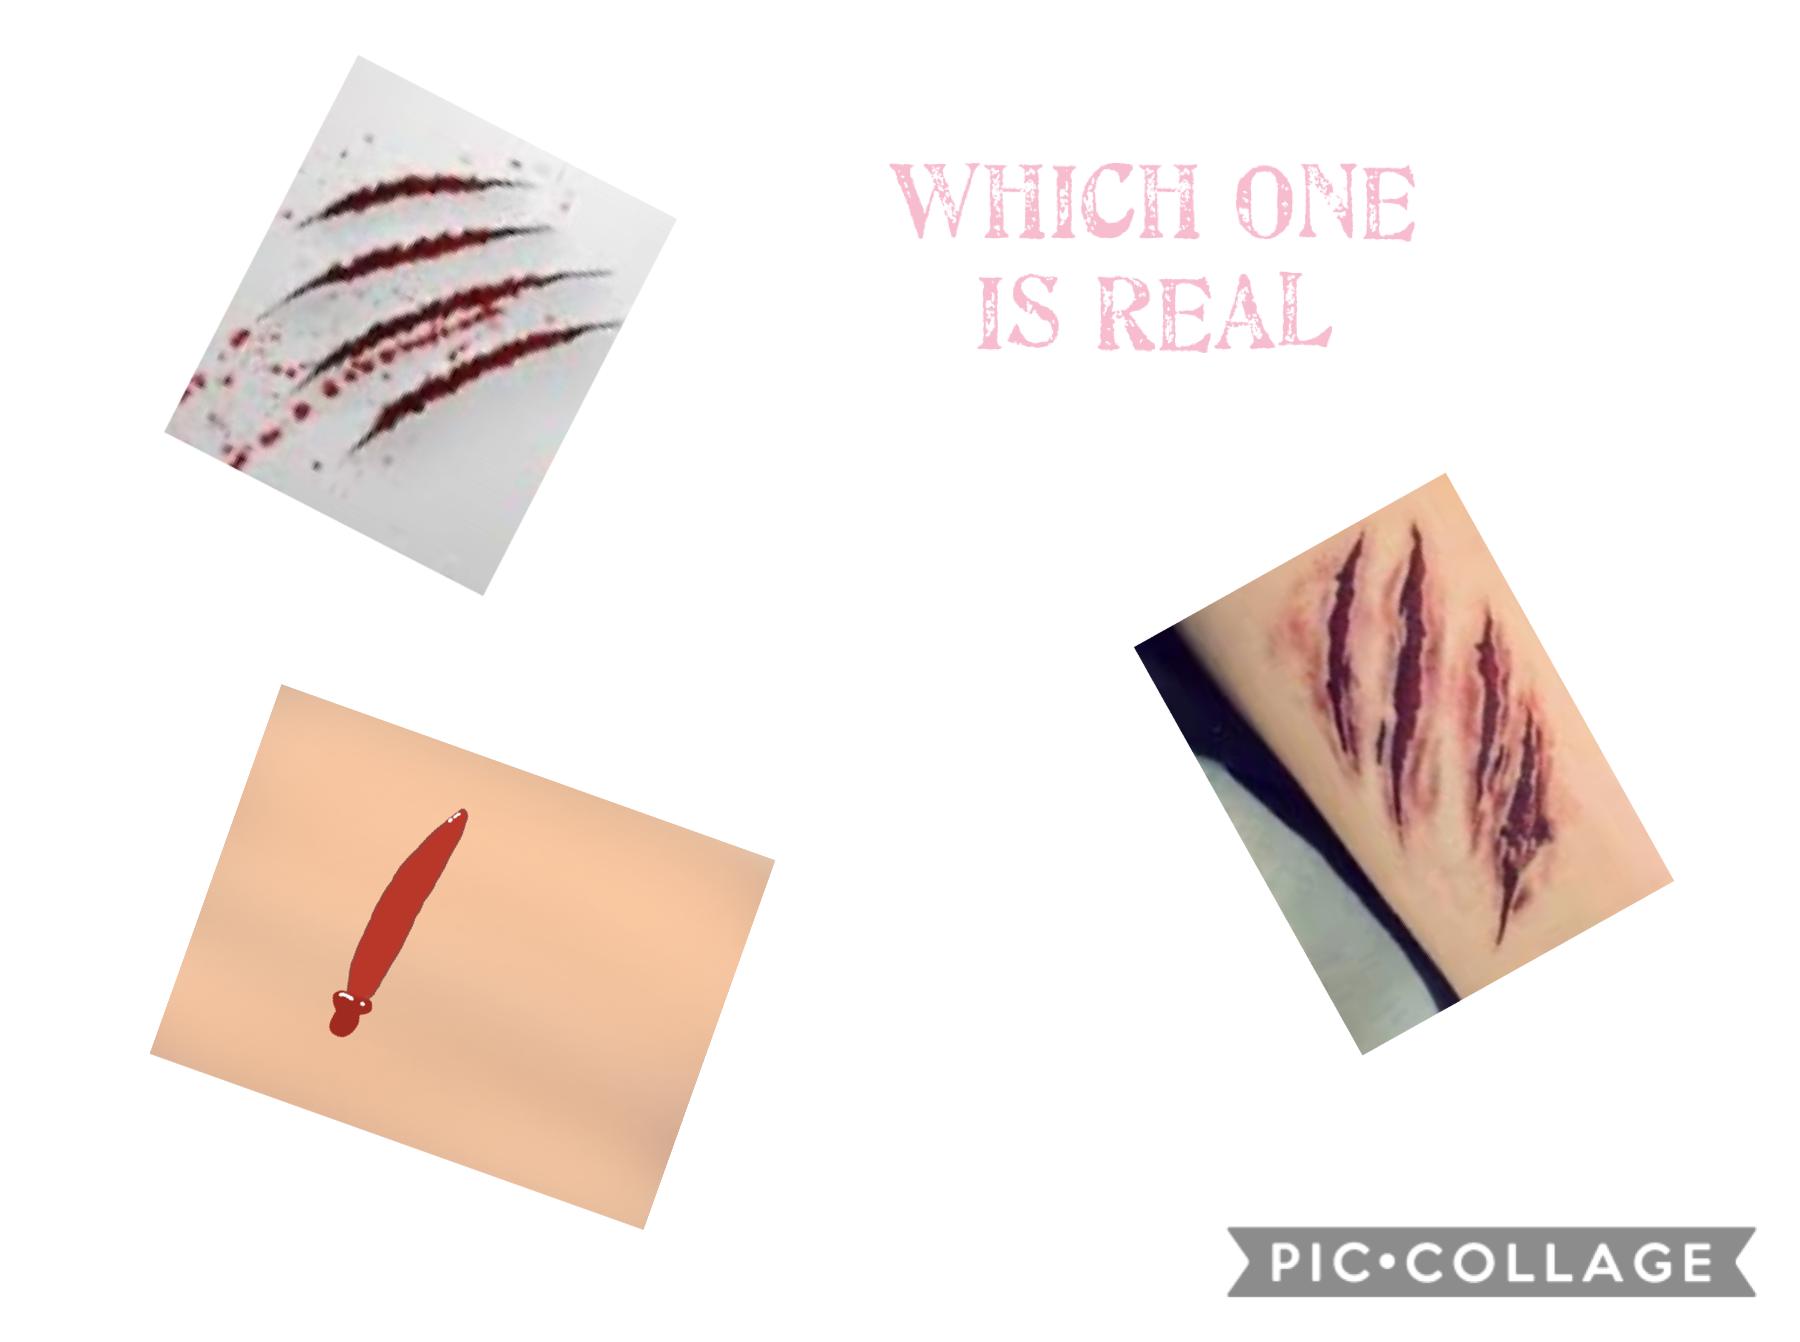 Tell me in the comments and don’t go by if it’s on the skin it could be any of them but choose wisely!😊